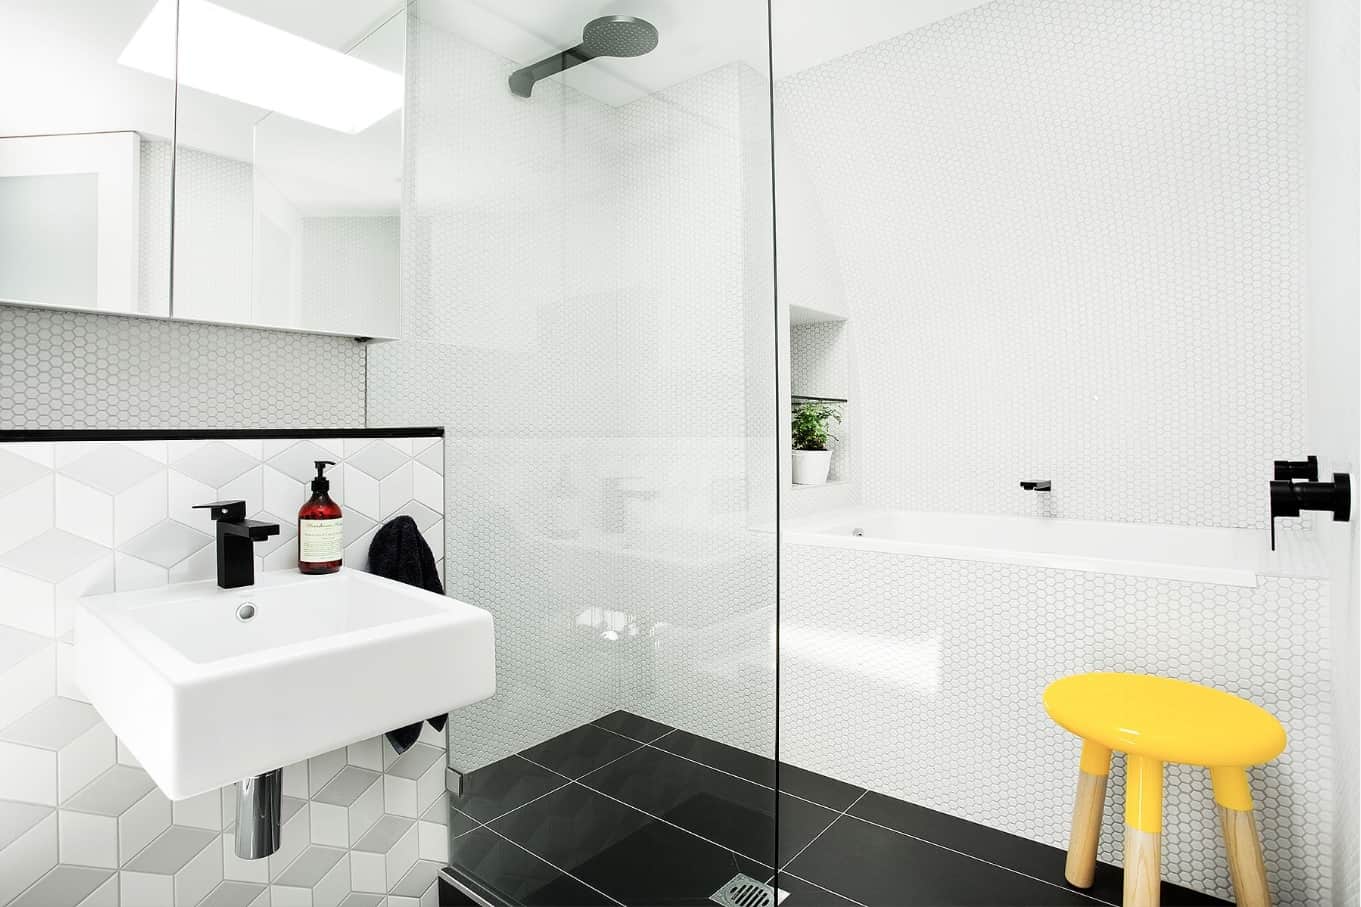 5 Key Tips for Remodeling a Small Bathroom. Nice modern design with glass shower zone